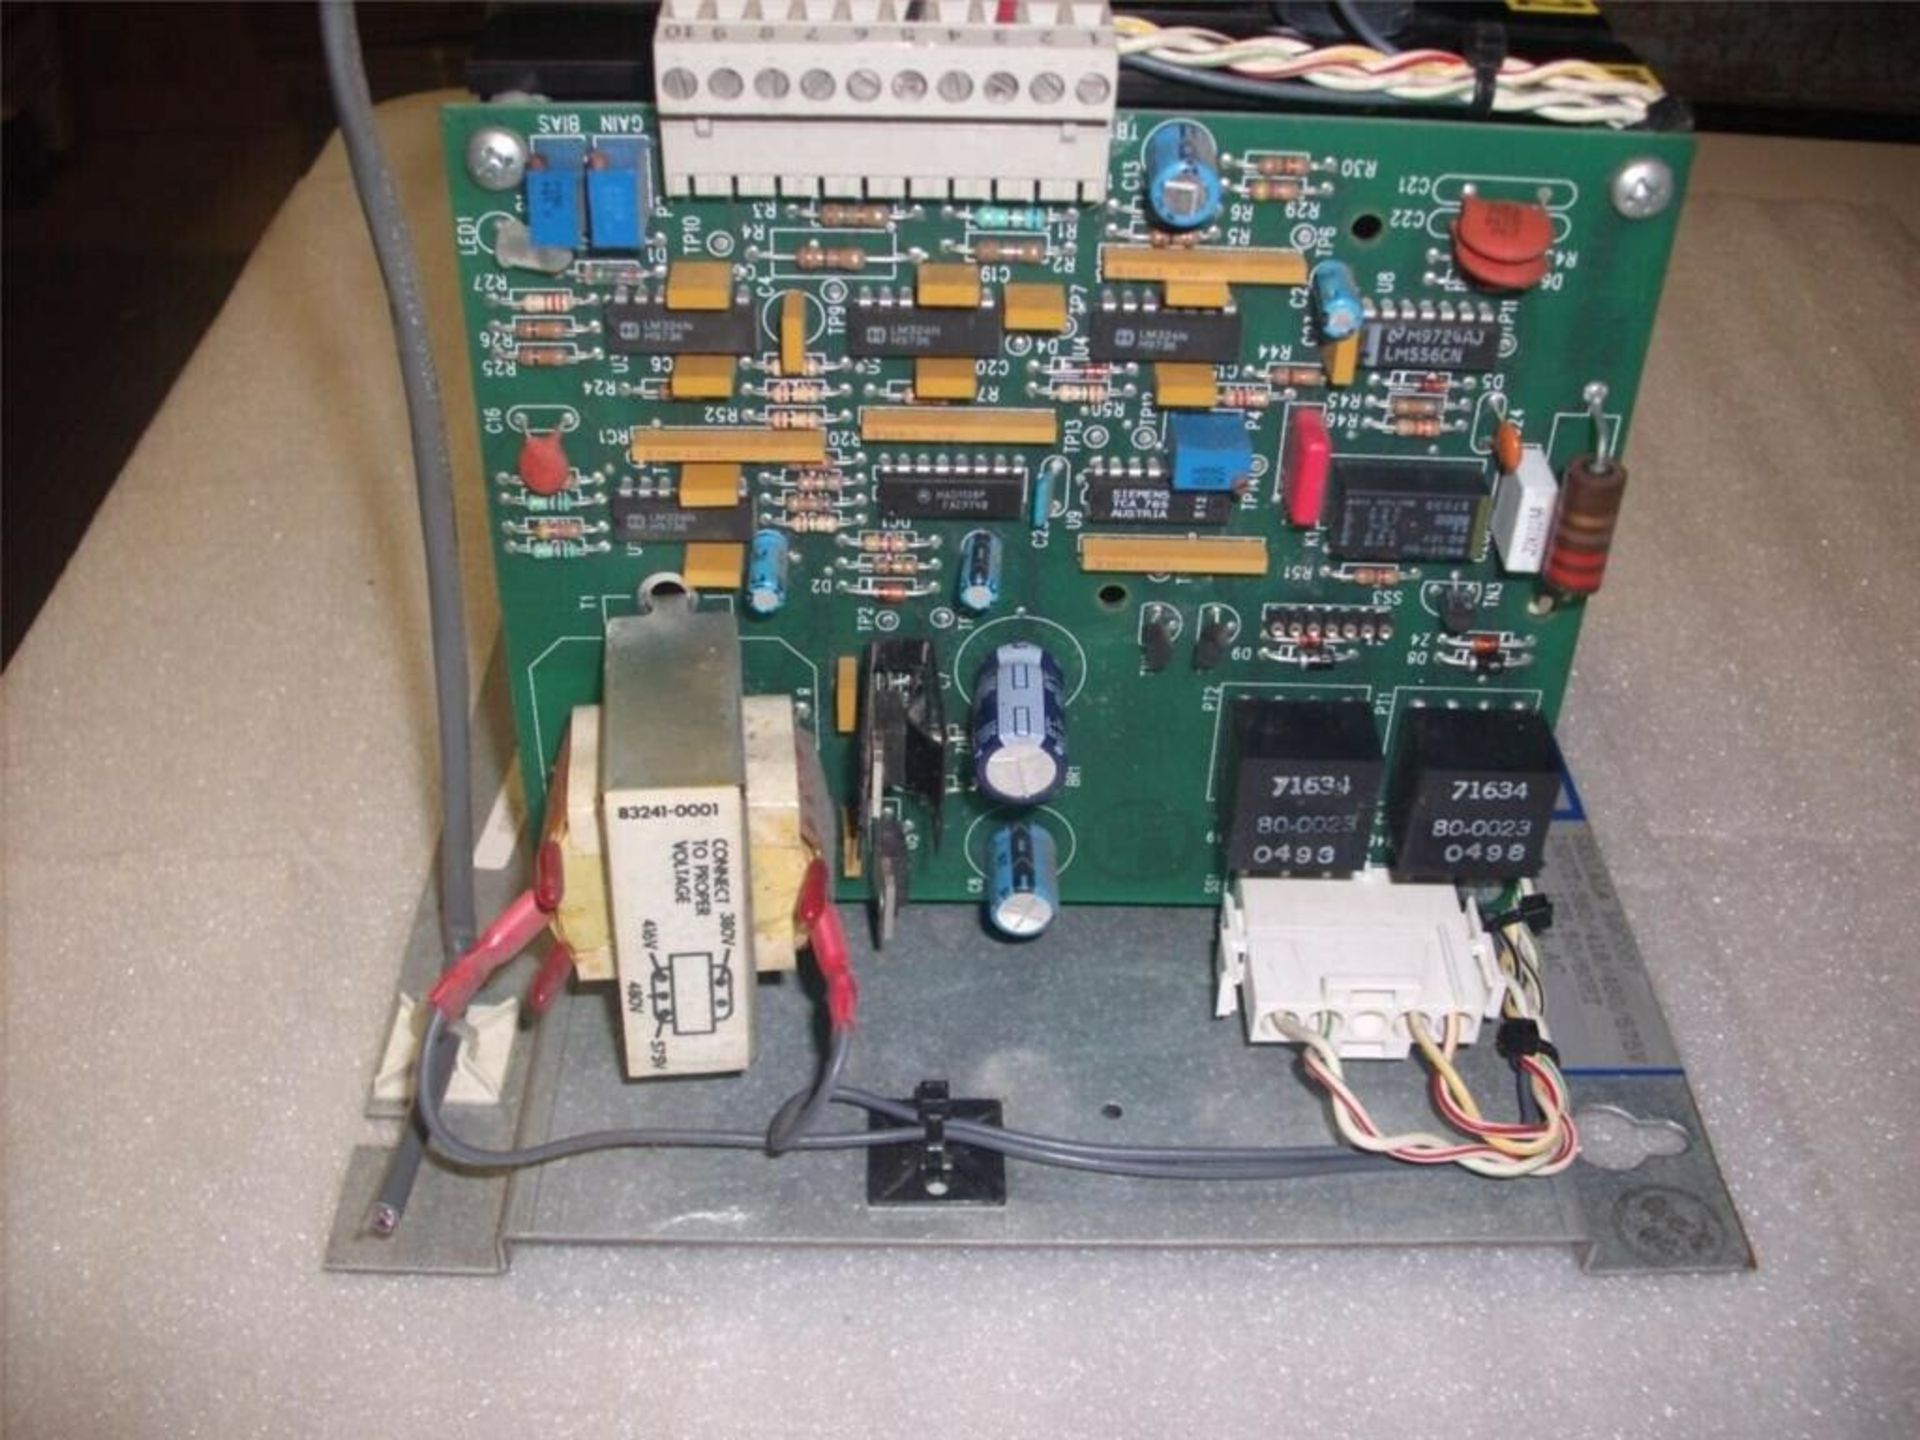 Spang 651-575-60 Power Control Unit - 1-Phase 60A / AC Output - Image 3 of 7